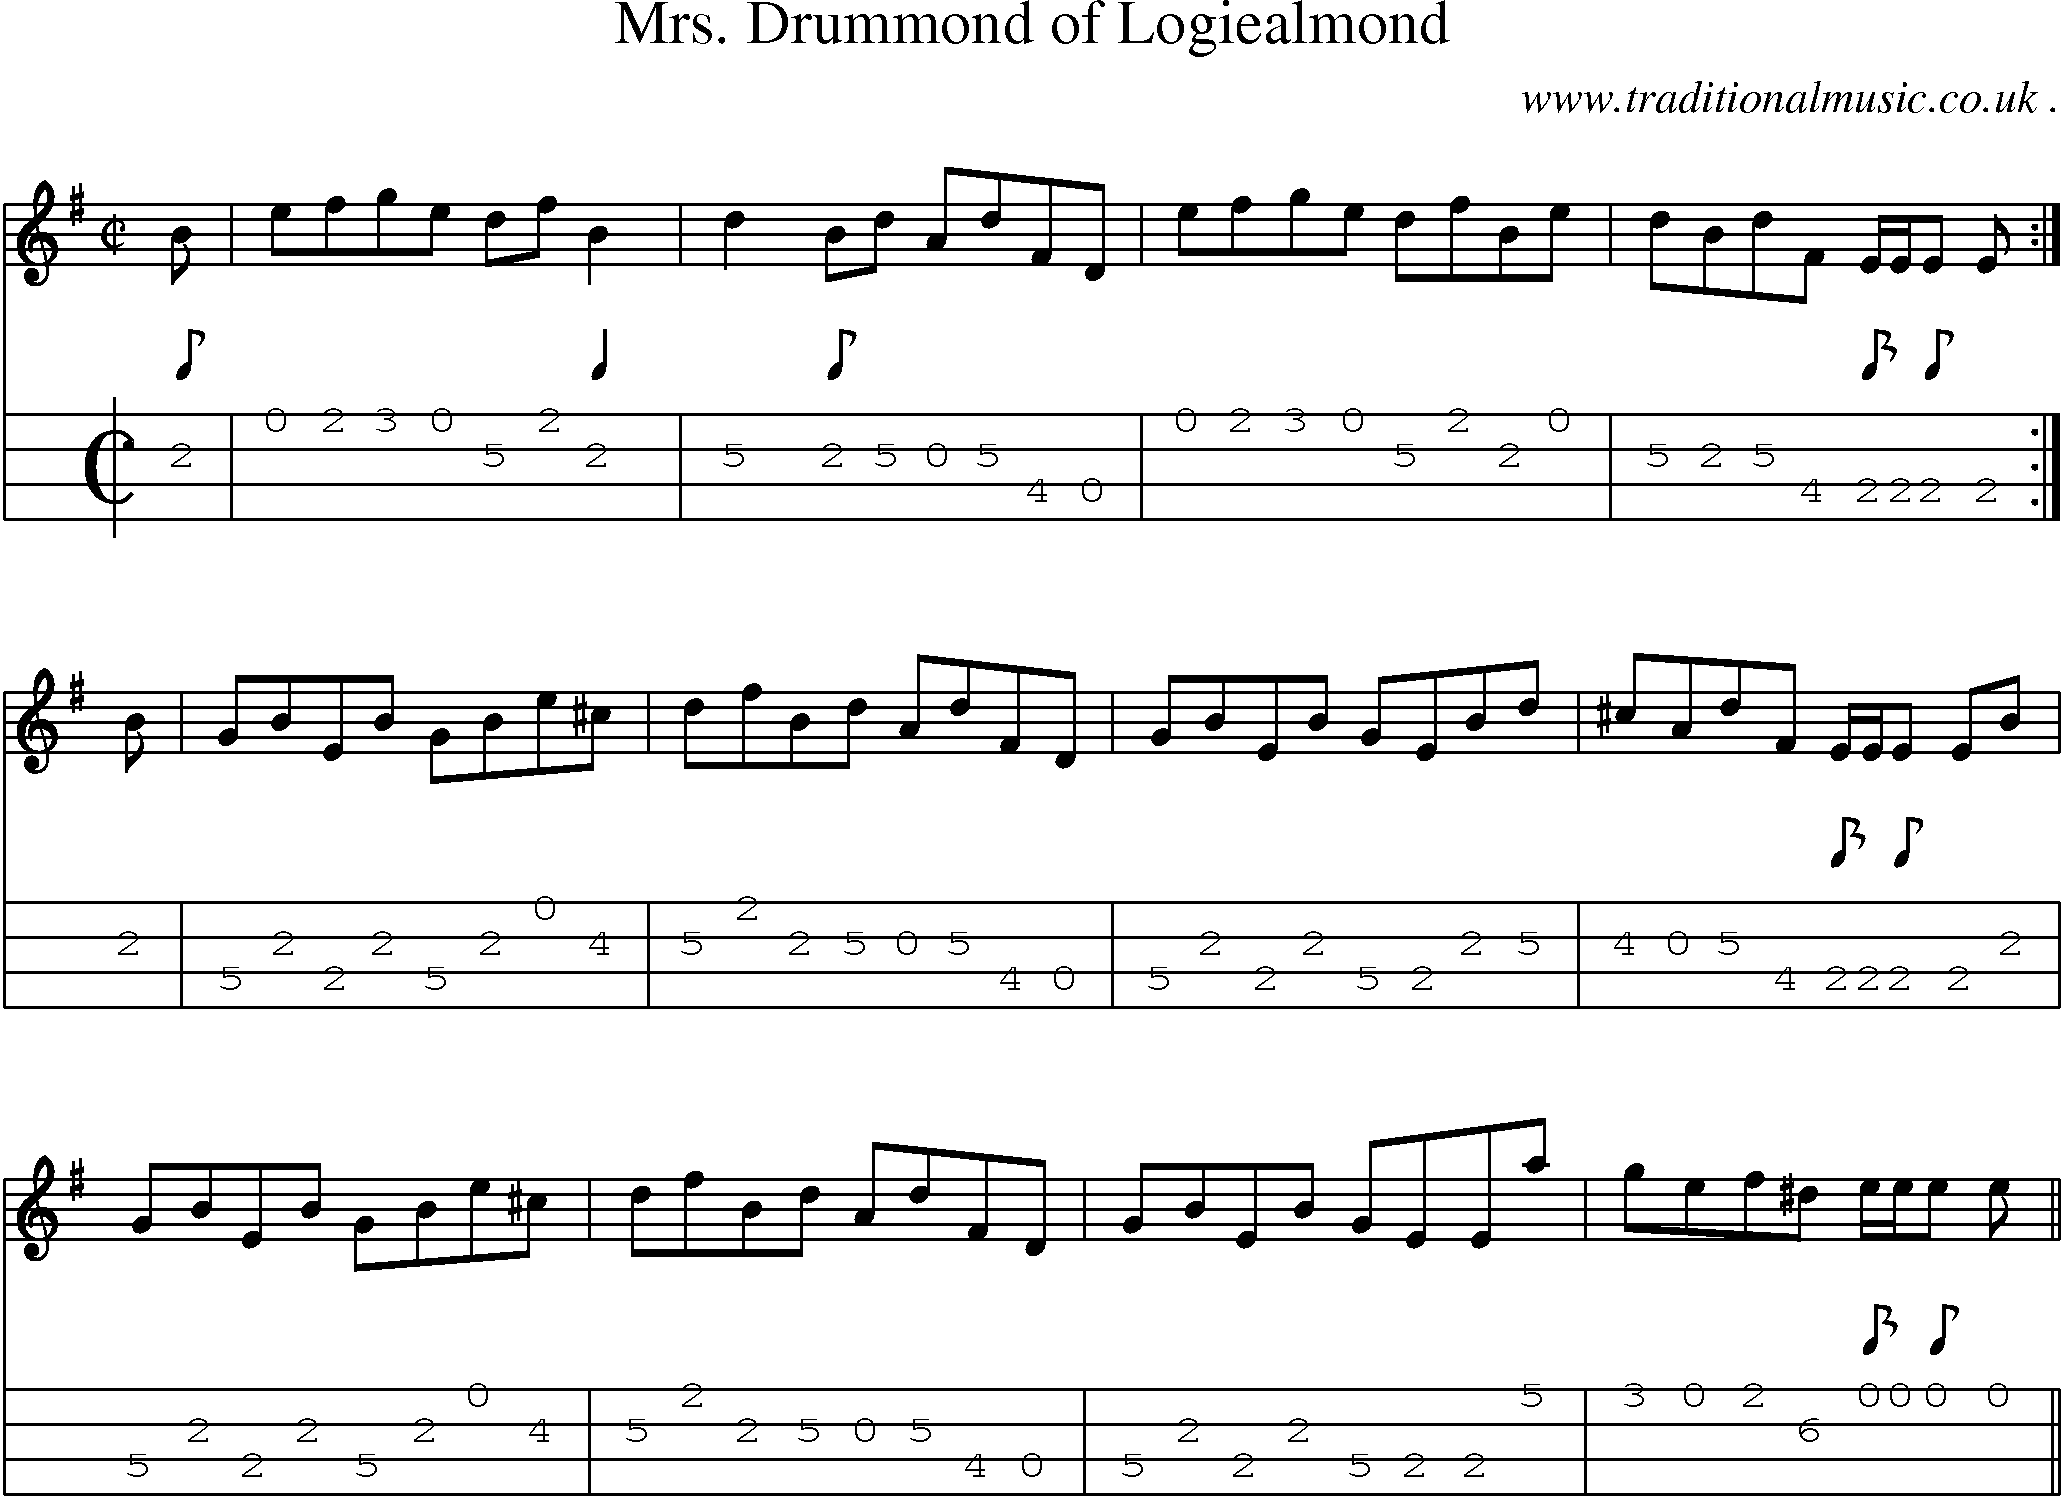 Sheet-music  score, Chords and Mandolin Tabs for Mrs Drummond Of Logiealmond